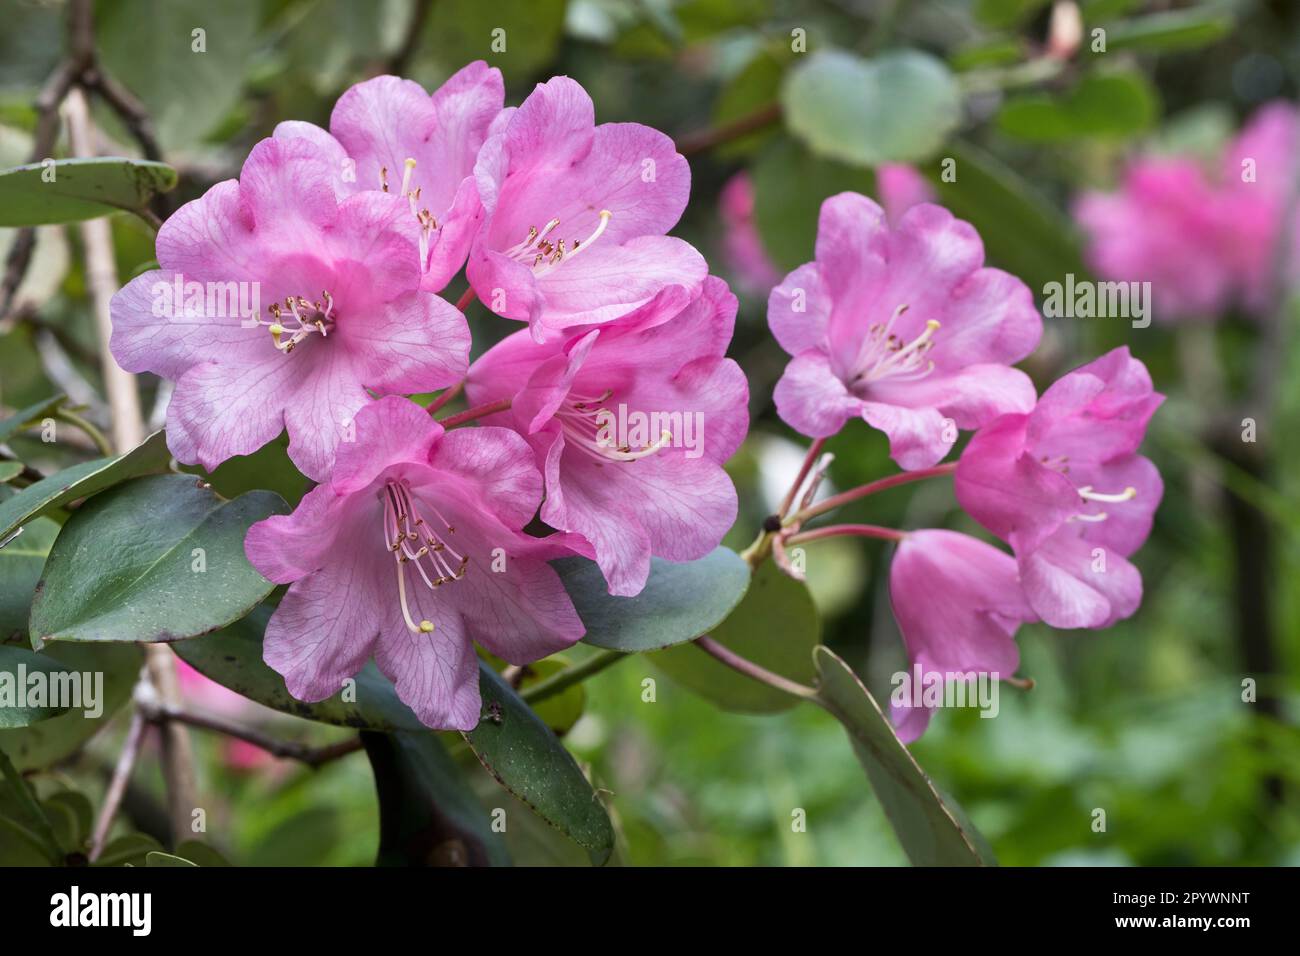 Rhododendron flower (Rhododendron orbiculare), Emsland, Lower Saxony, Germany Stock Photo